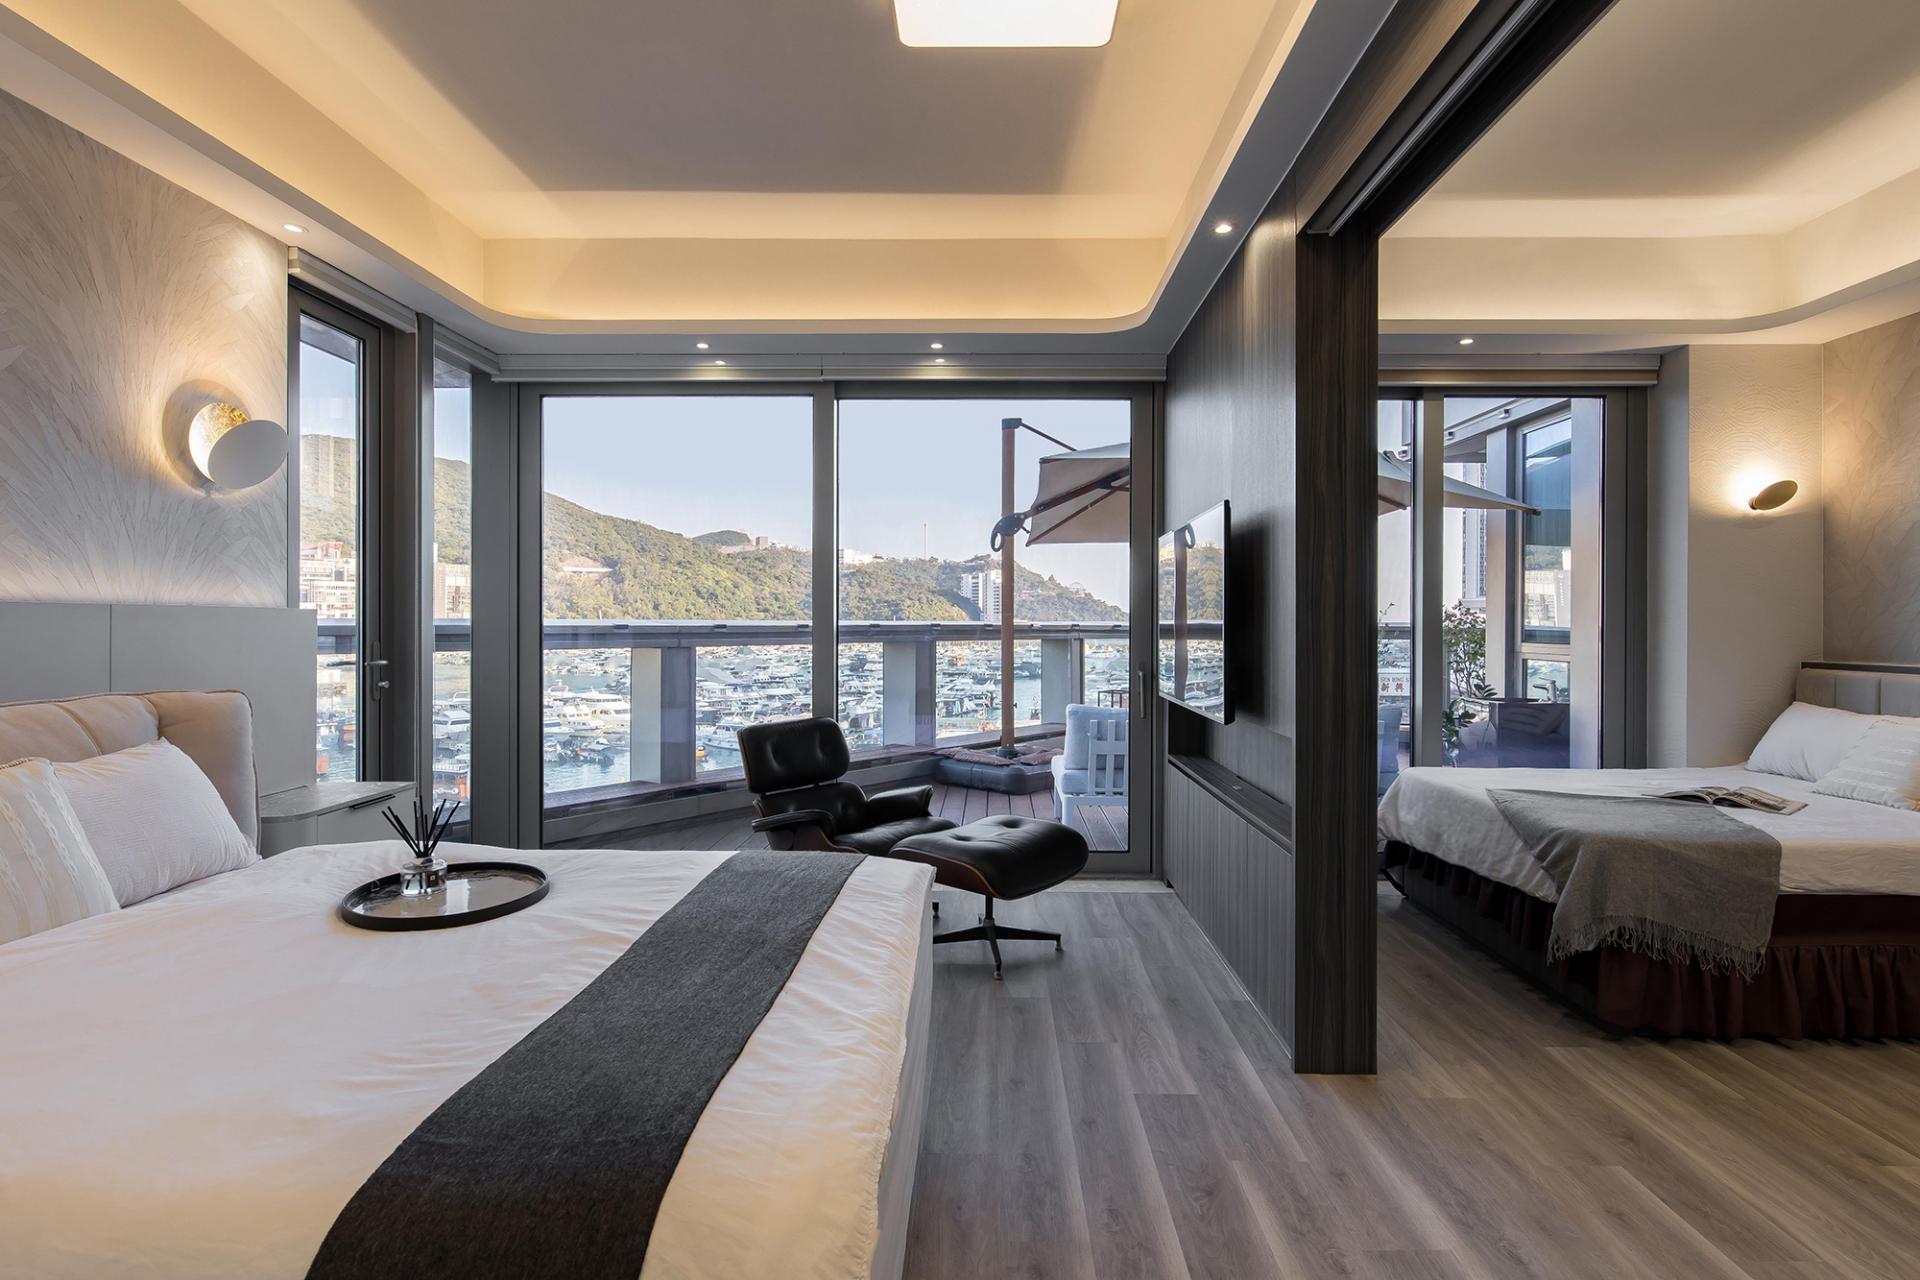 A 1,657 Sq. Ft. Haven in Ap Lei Chau, Hong Kong for Retirees to Enjoy Luxurious Comfort